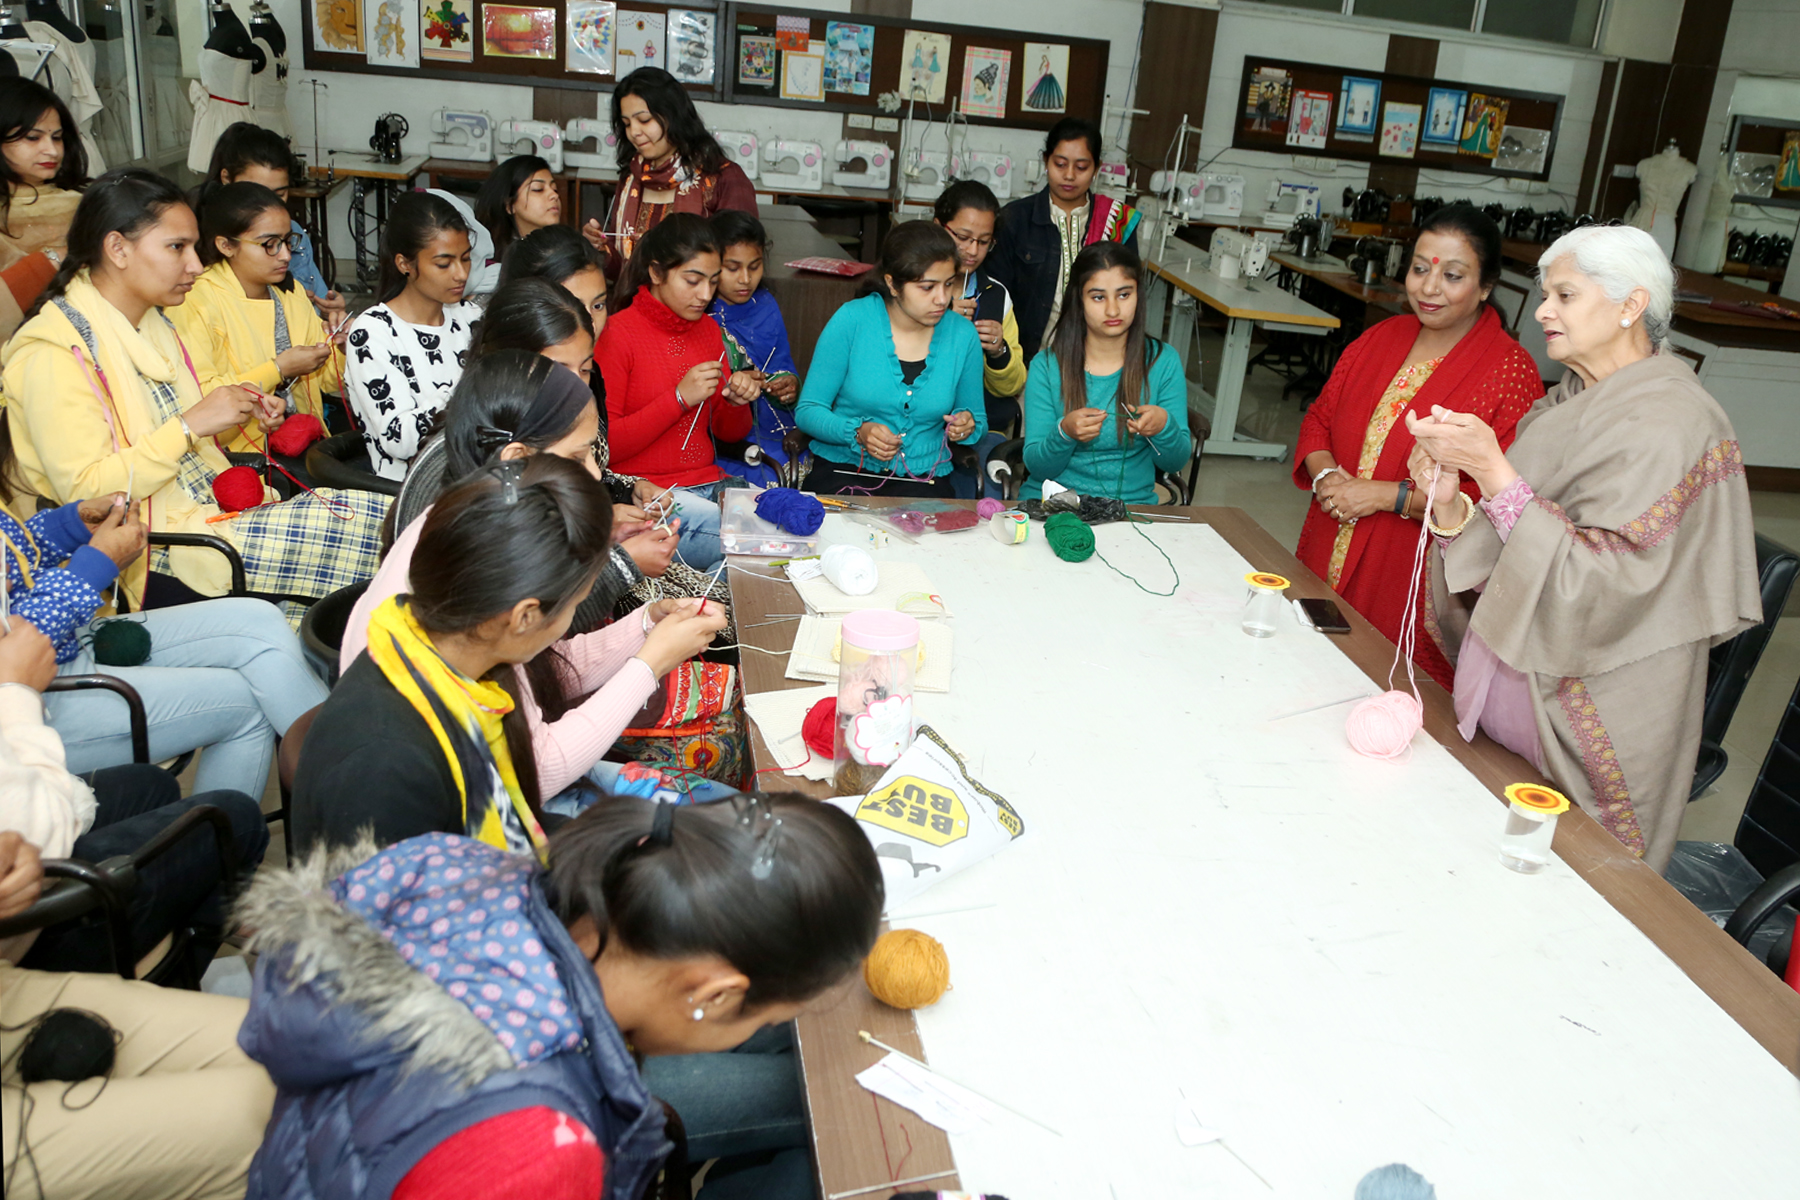 You are currently viewing The PG Dept.of Fashion Designing of Hans Raj Mahila Maha Vidyalaya organized a workshop on the topic Knitting.